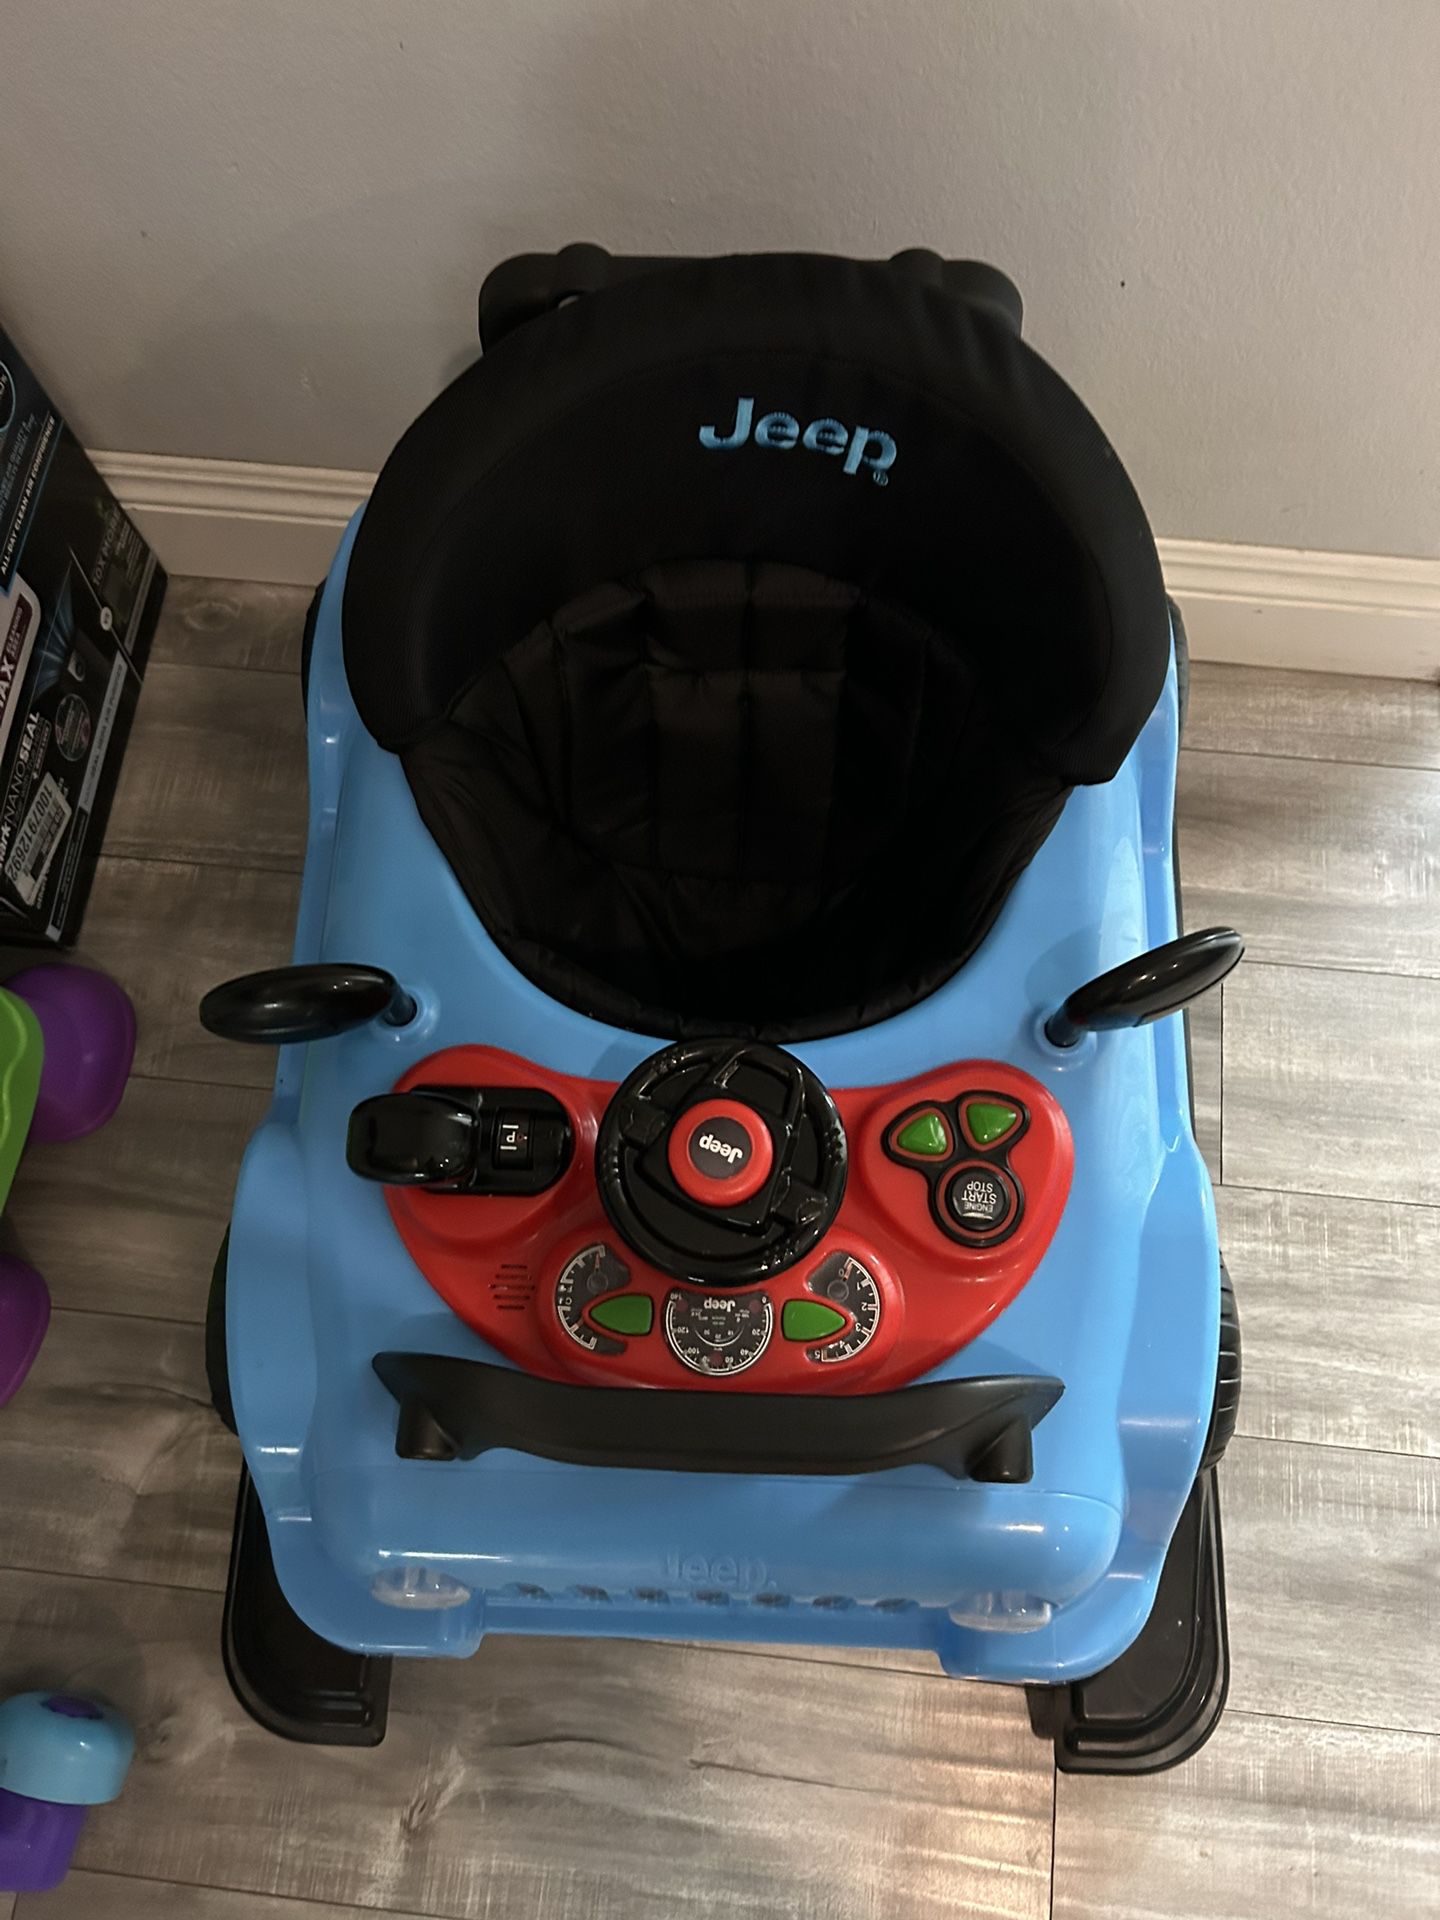 Jeep Walker Jeep Classic Wrangler 3-in-1 Grow with Me Walker by Delta  Chidlren, Blue for Sale in Ontario, CA - OfferUp